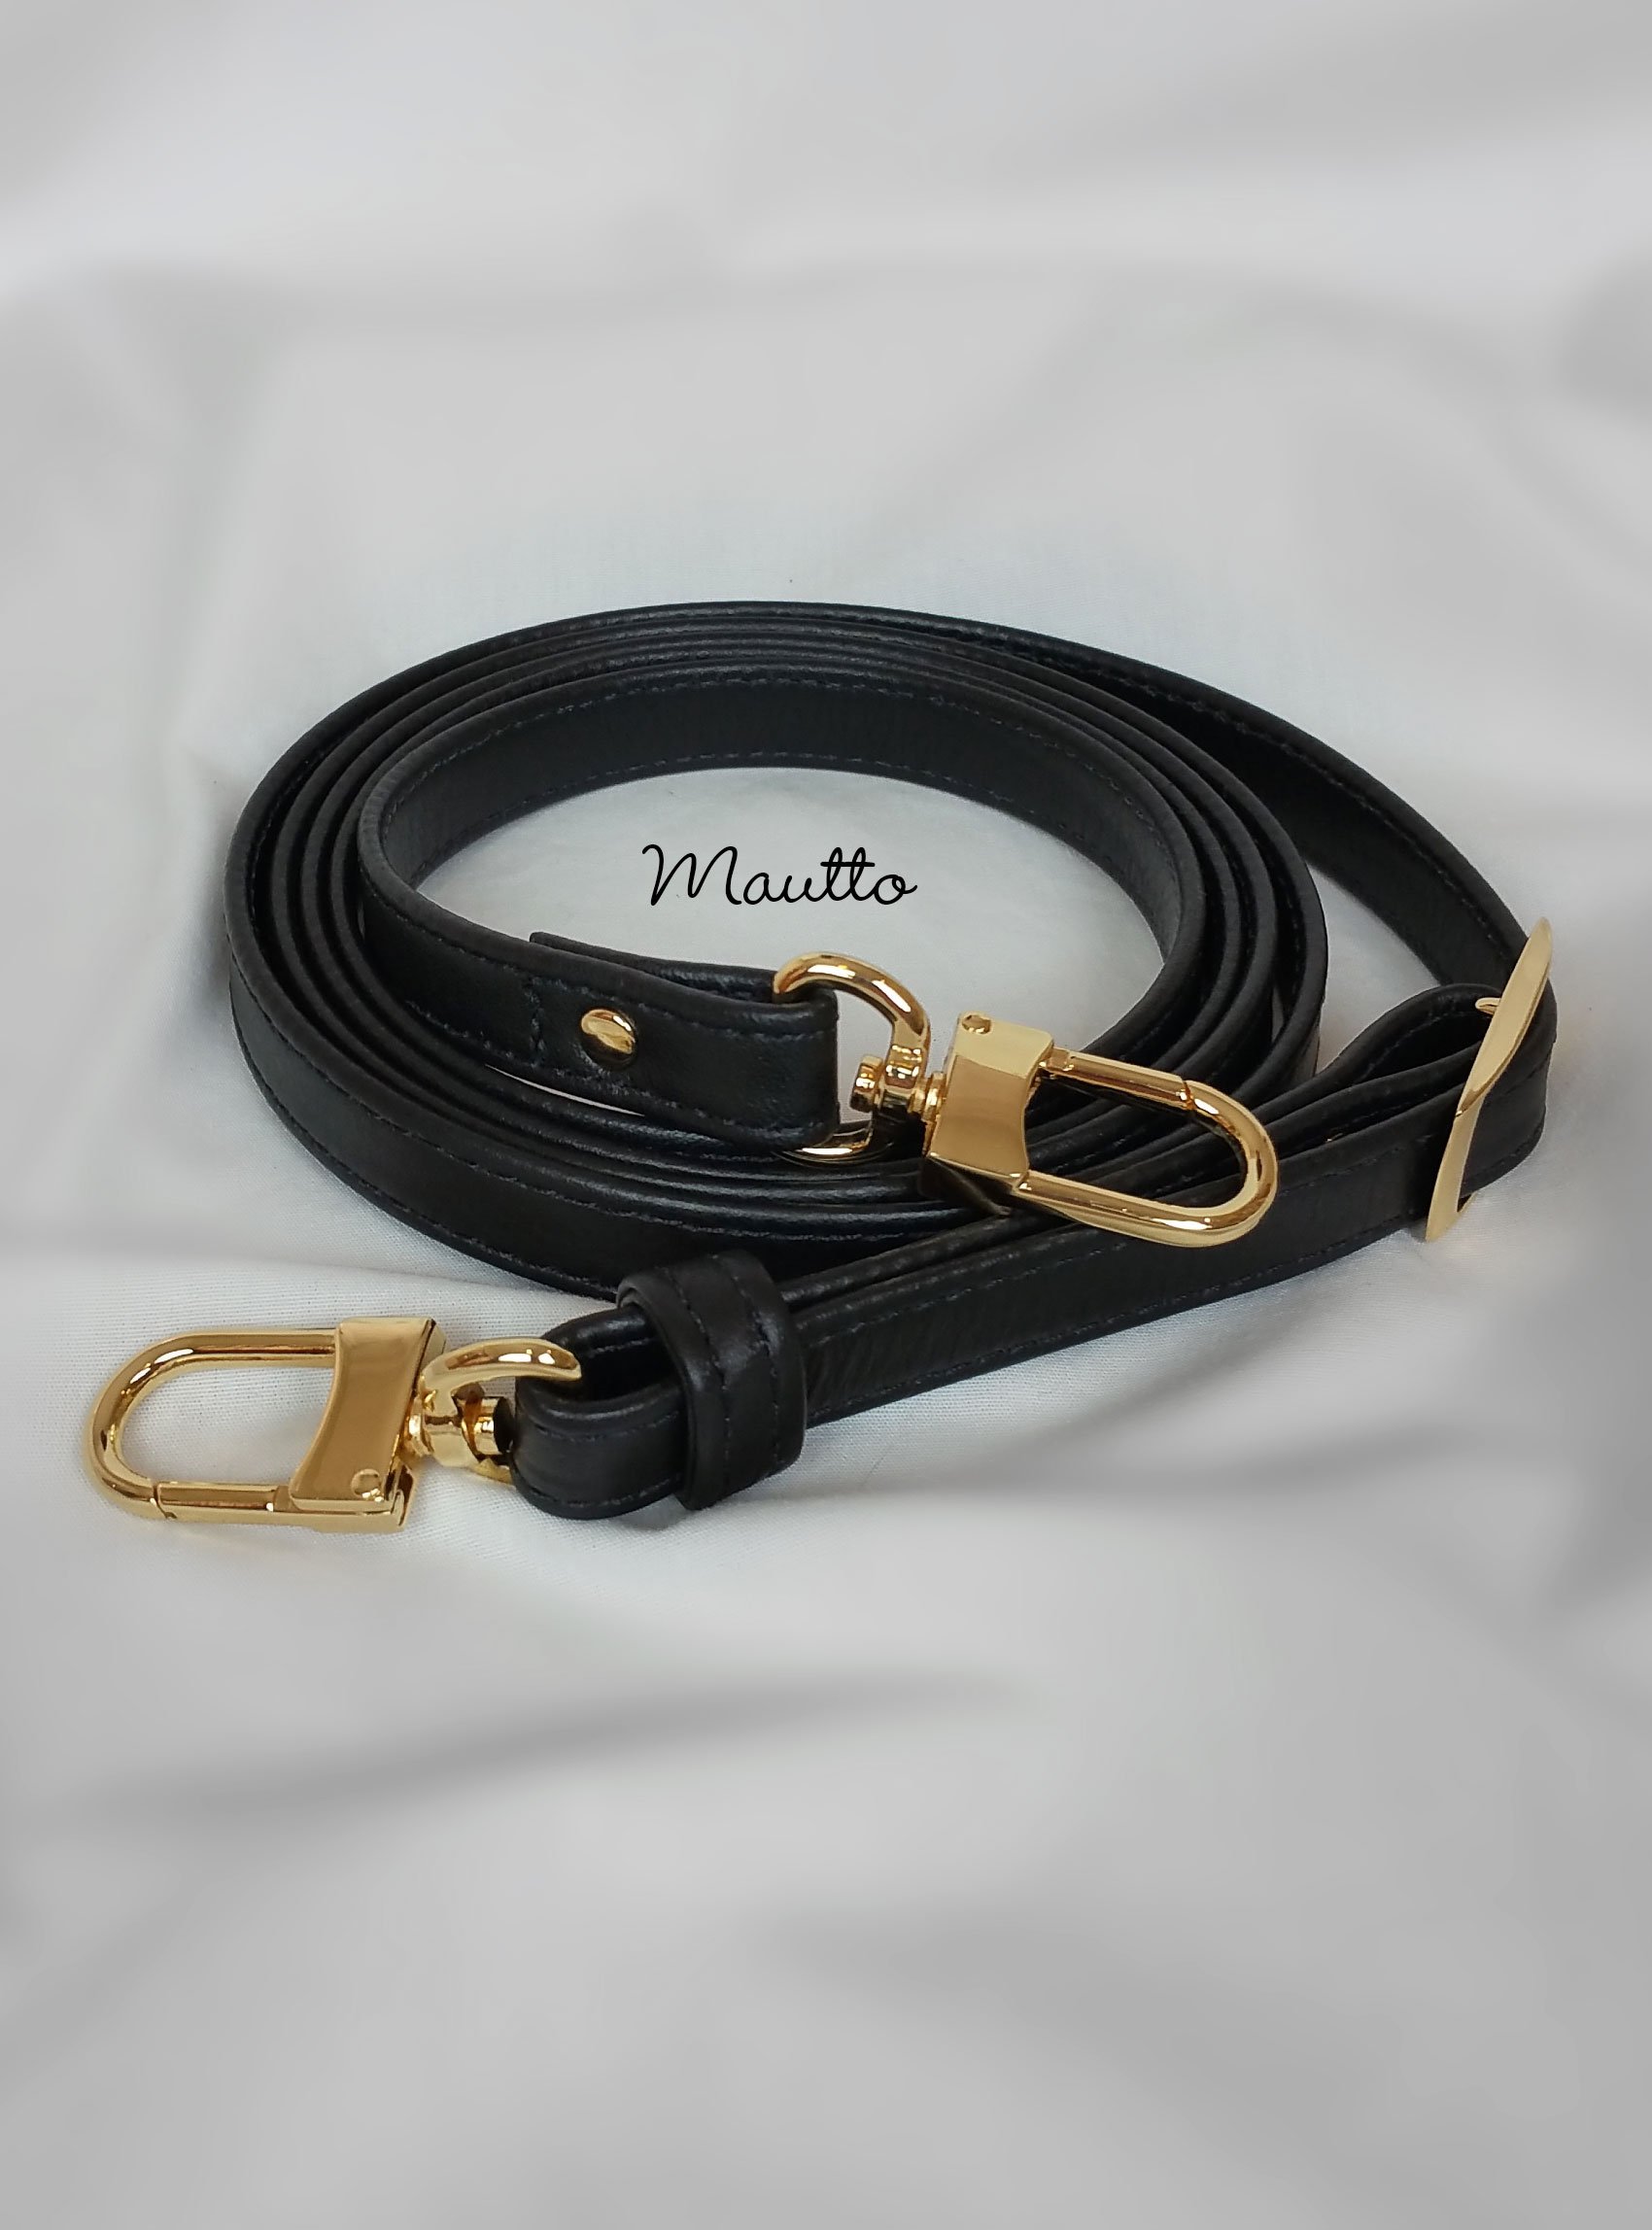 Black Leather Strap for Louis Vuitton Pochette/Alma/Eva/etc - .5 Wide -  Fixed or Adjustable Lengths